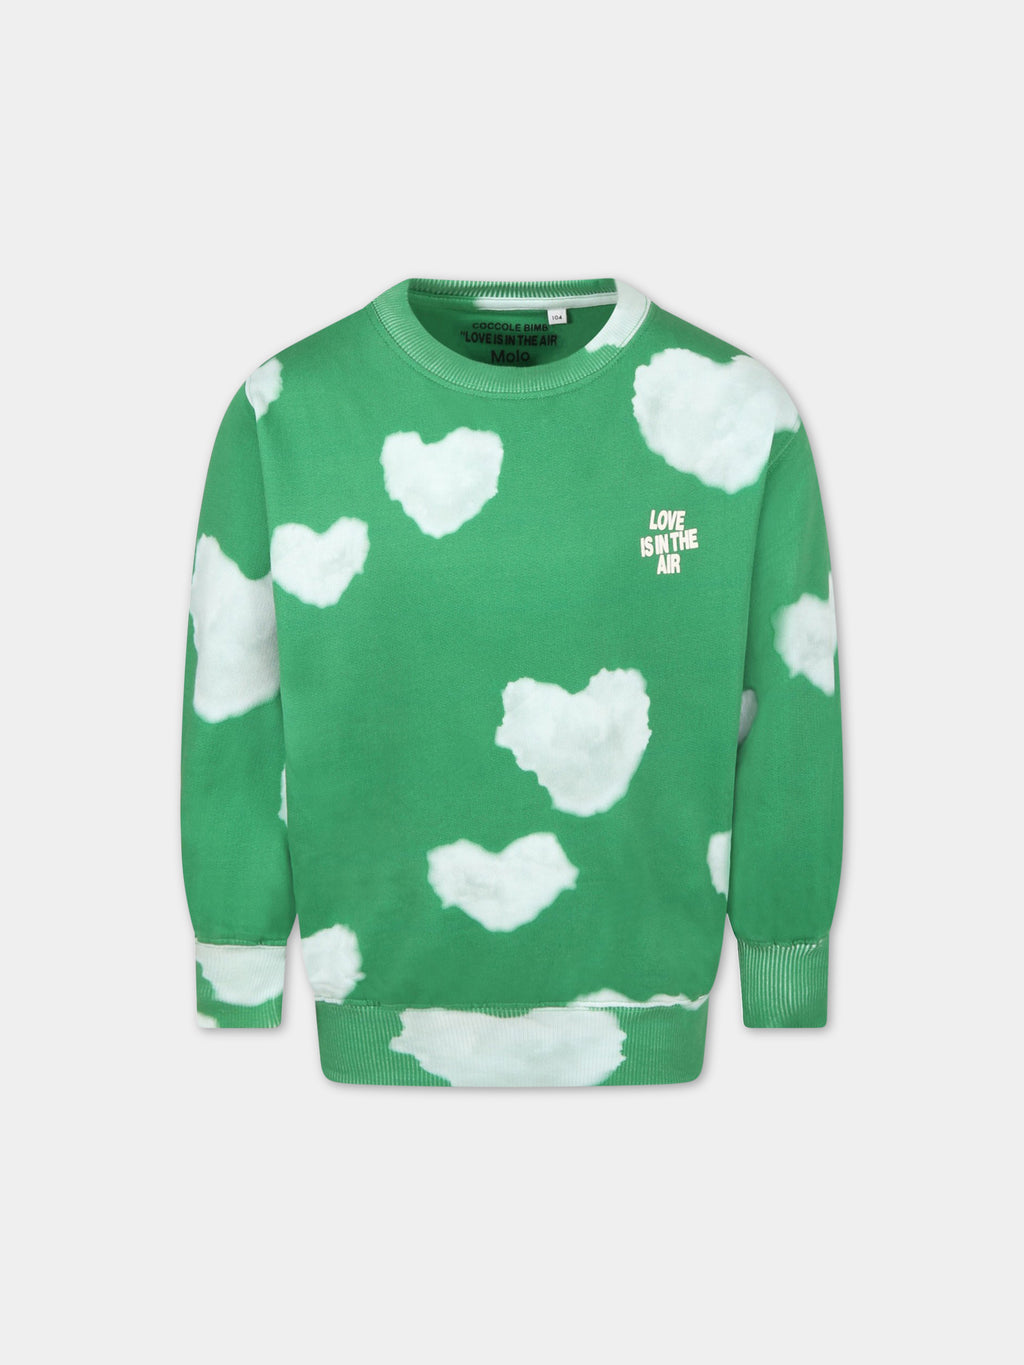 Green sweatshirt for kids with iconic white clouds